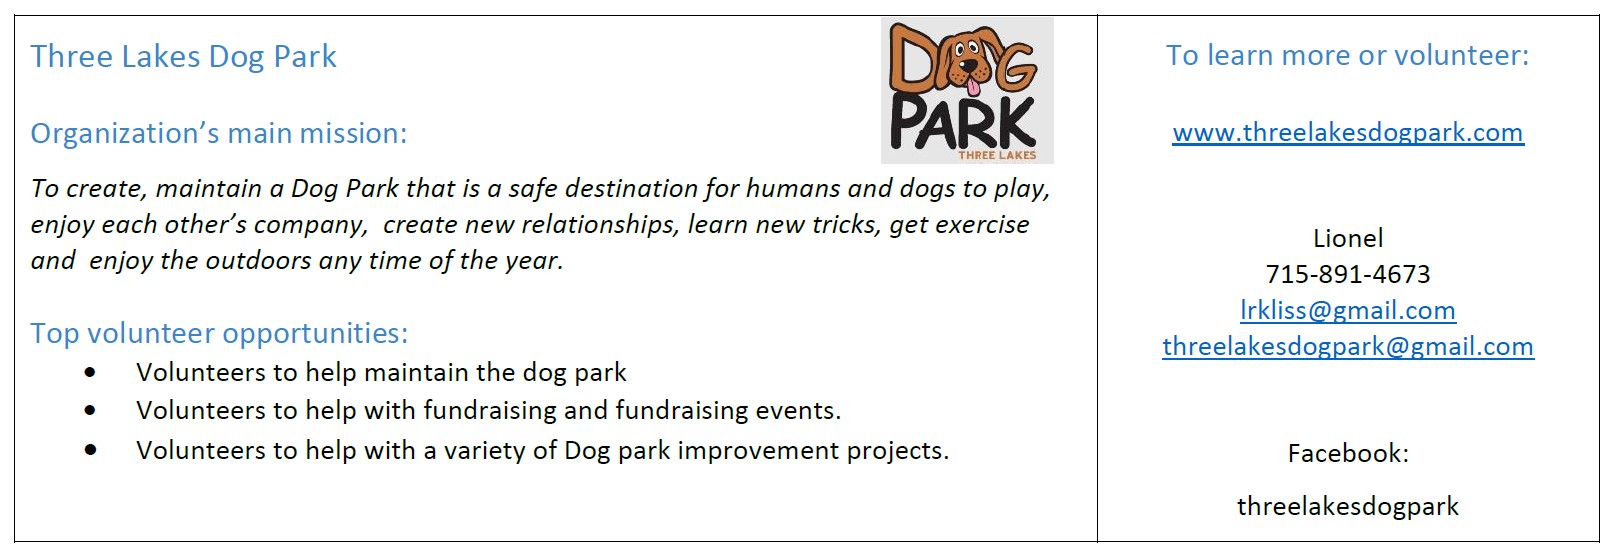 Volunteer opportunities at the Three Lakes Dog Park